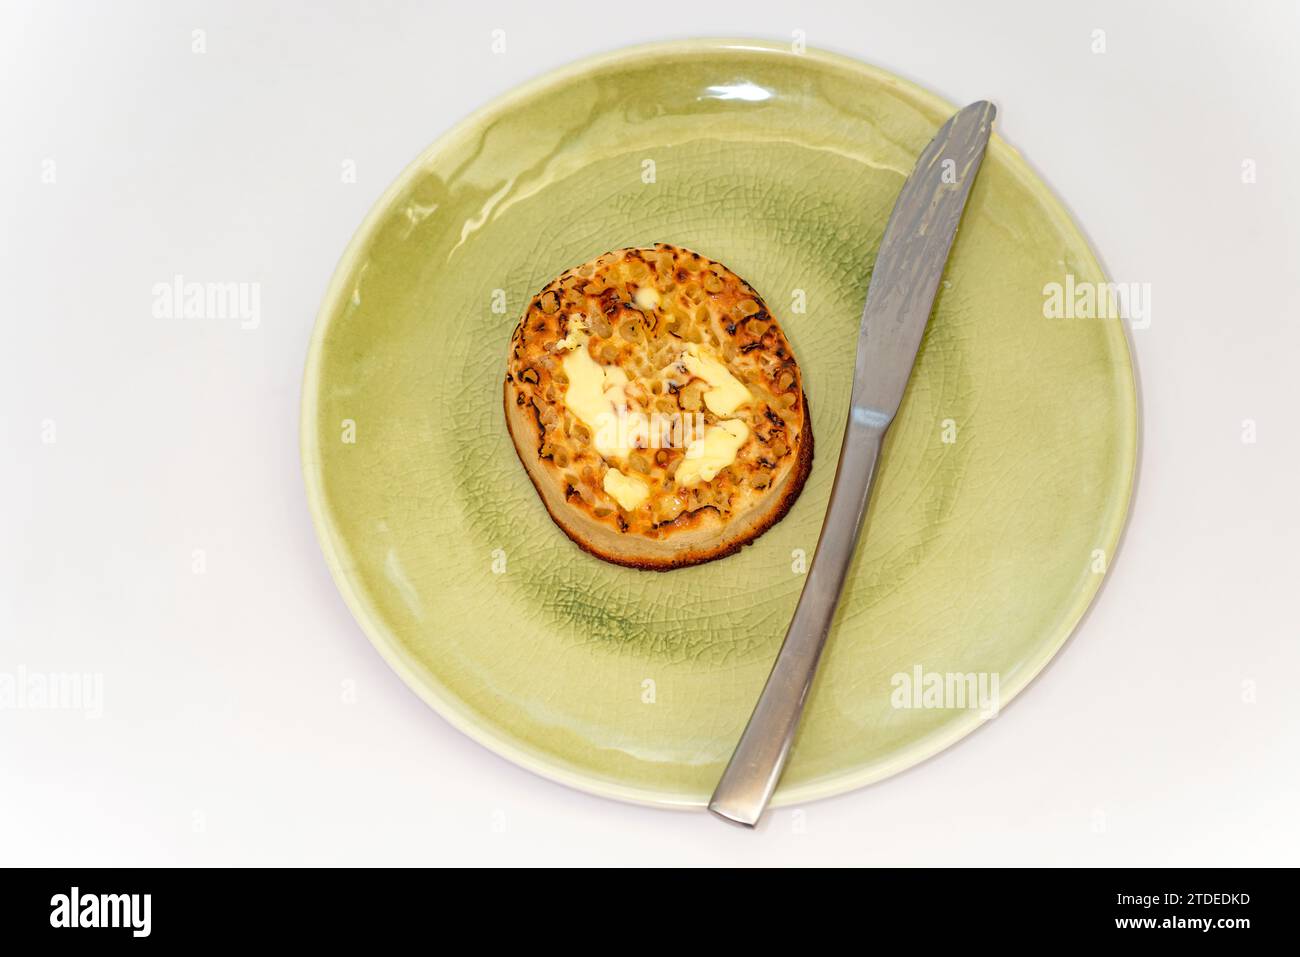 Toasted buttered crumpet Stock Photo